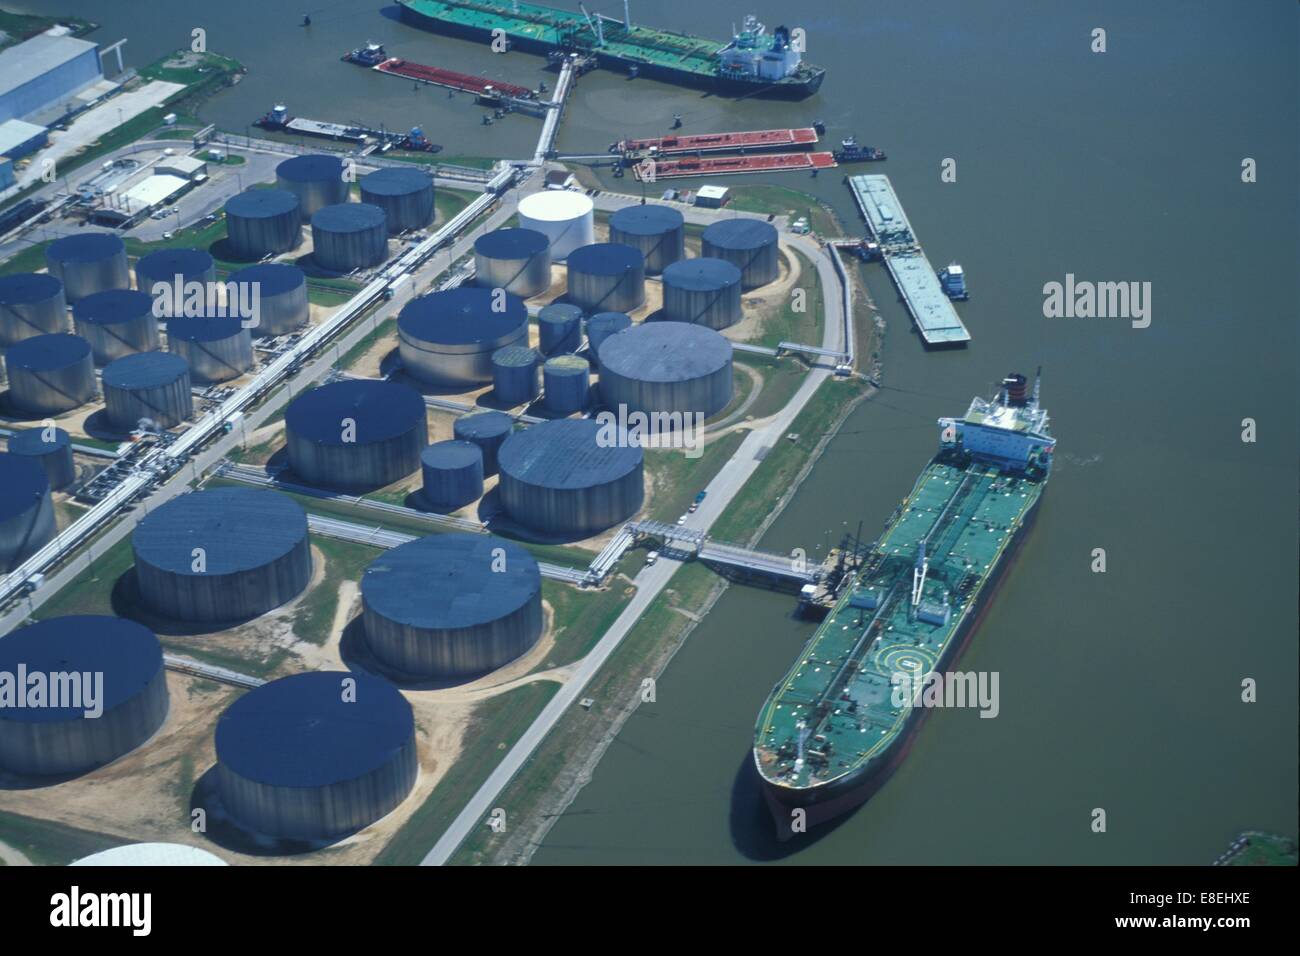 Two Oil Tankers Offloading at Oil Storage Facility with Blue Tanks Stock Photo